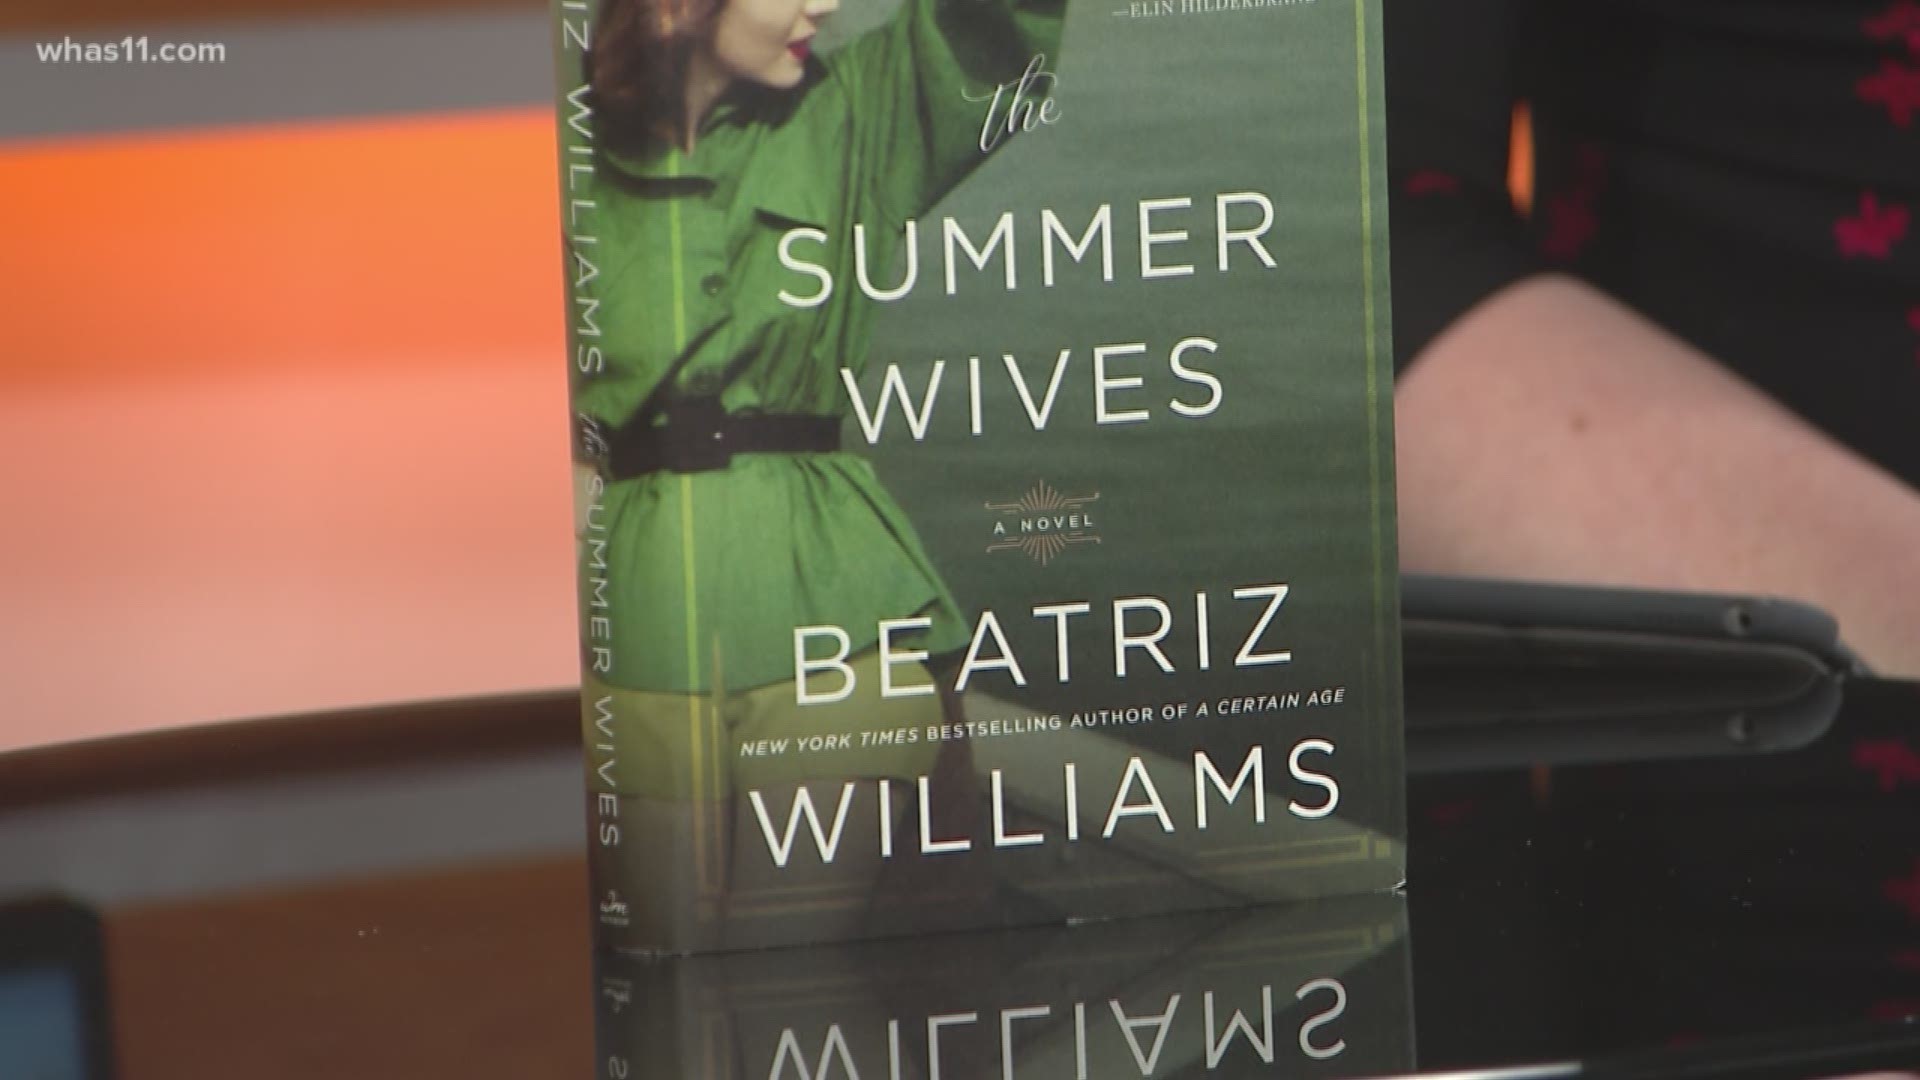 It's a postwar novel about love, power and redemption based off the New England coast. The author, Beatriz Williams, will be at the Louisville Free Public Library on July 8. Tickets are required, call (502) 574-1644 to request them.